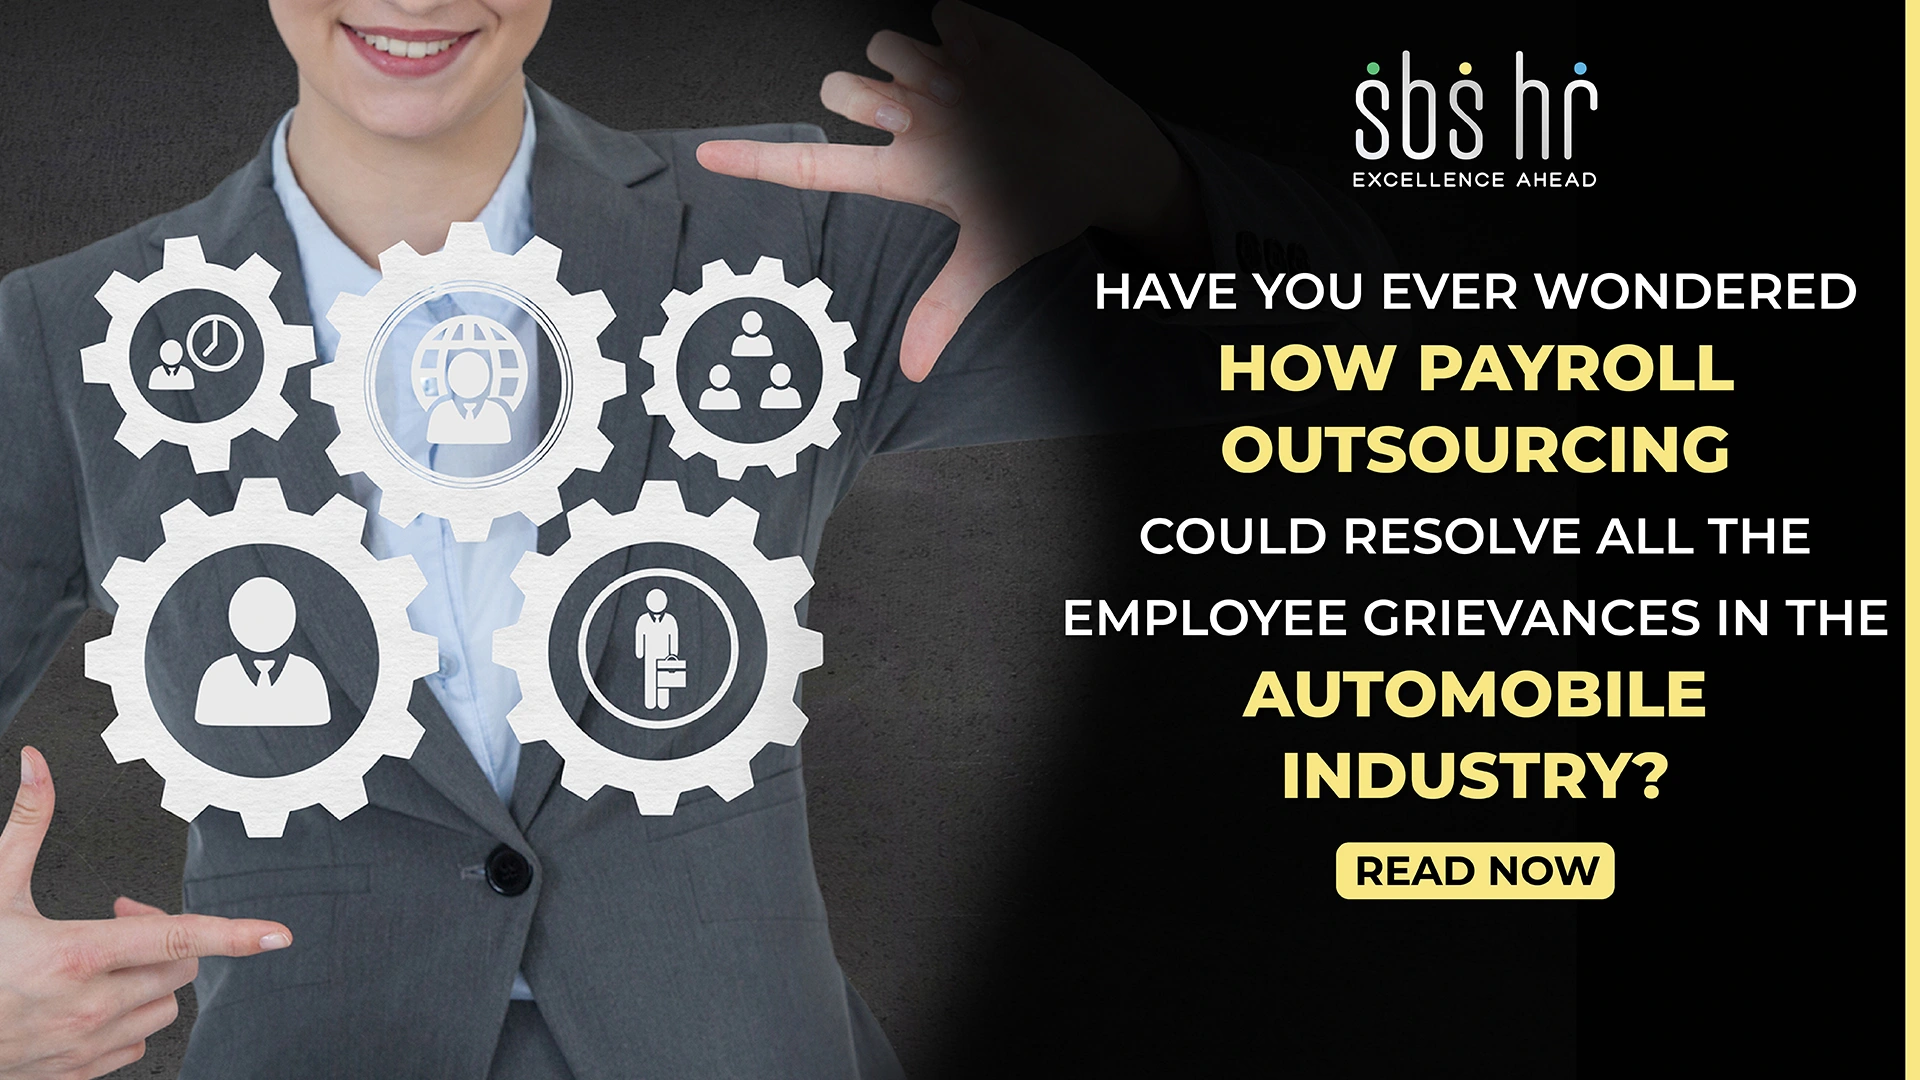 Have you ever wondered how payroll outsourcing could resolve all the employee grievances in the automobile industry?